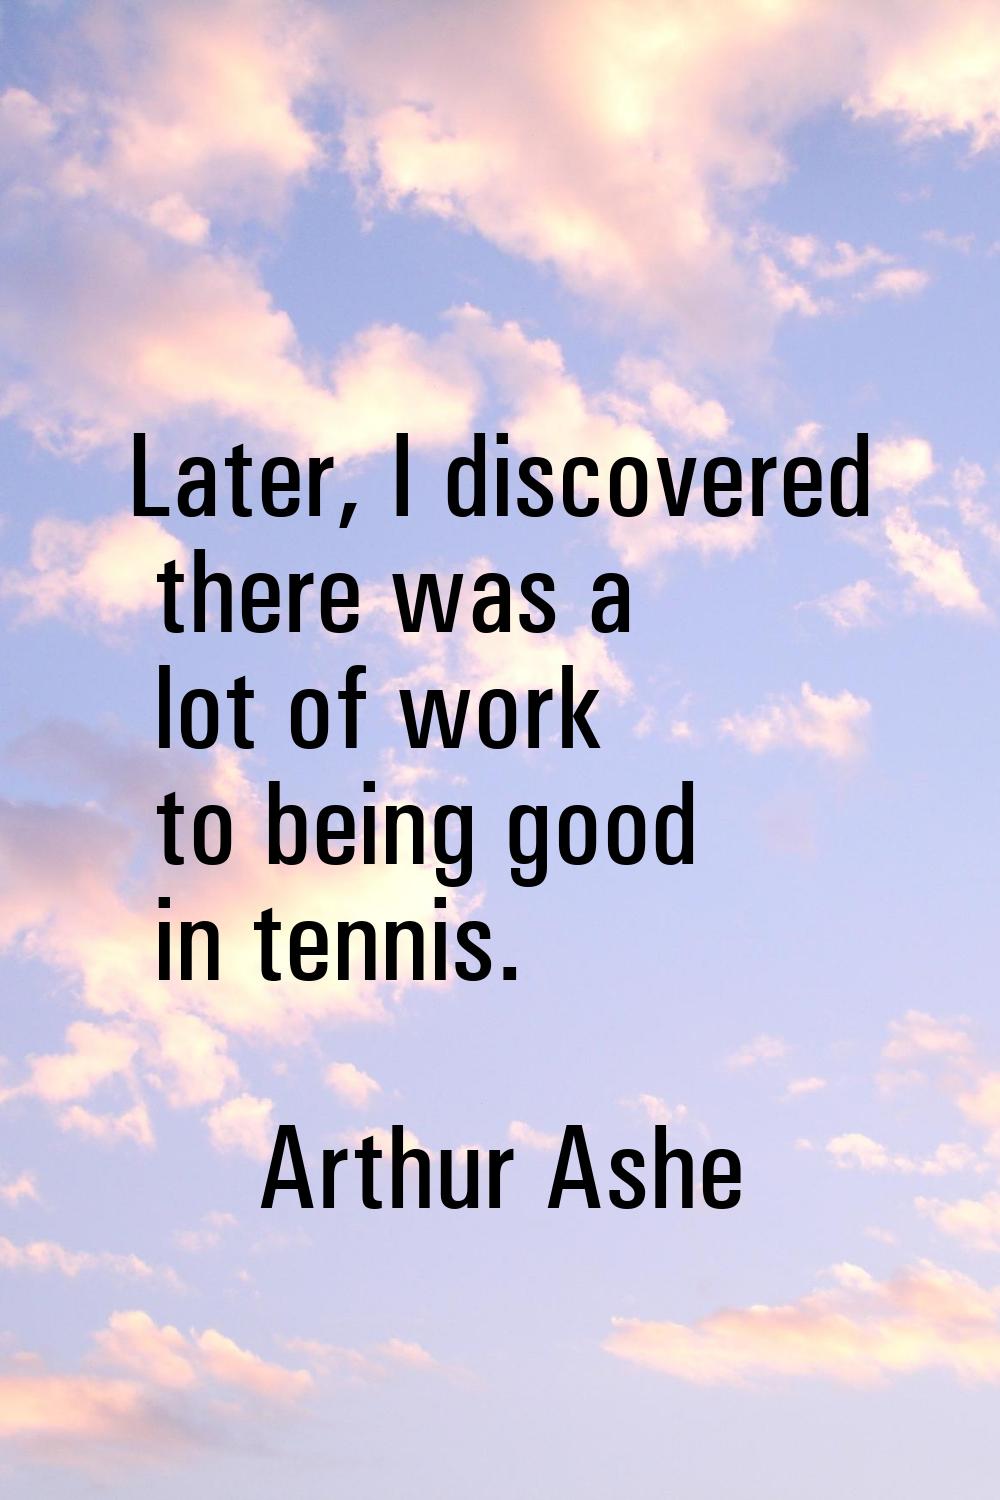 Later, I discovered there was a lot of work to being good in tennis.